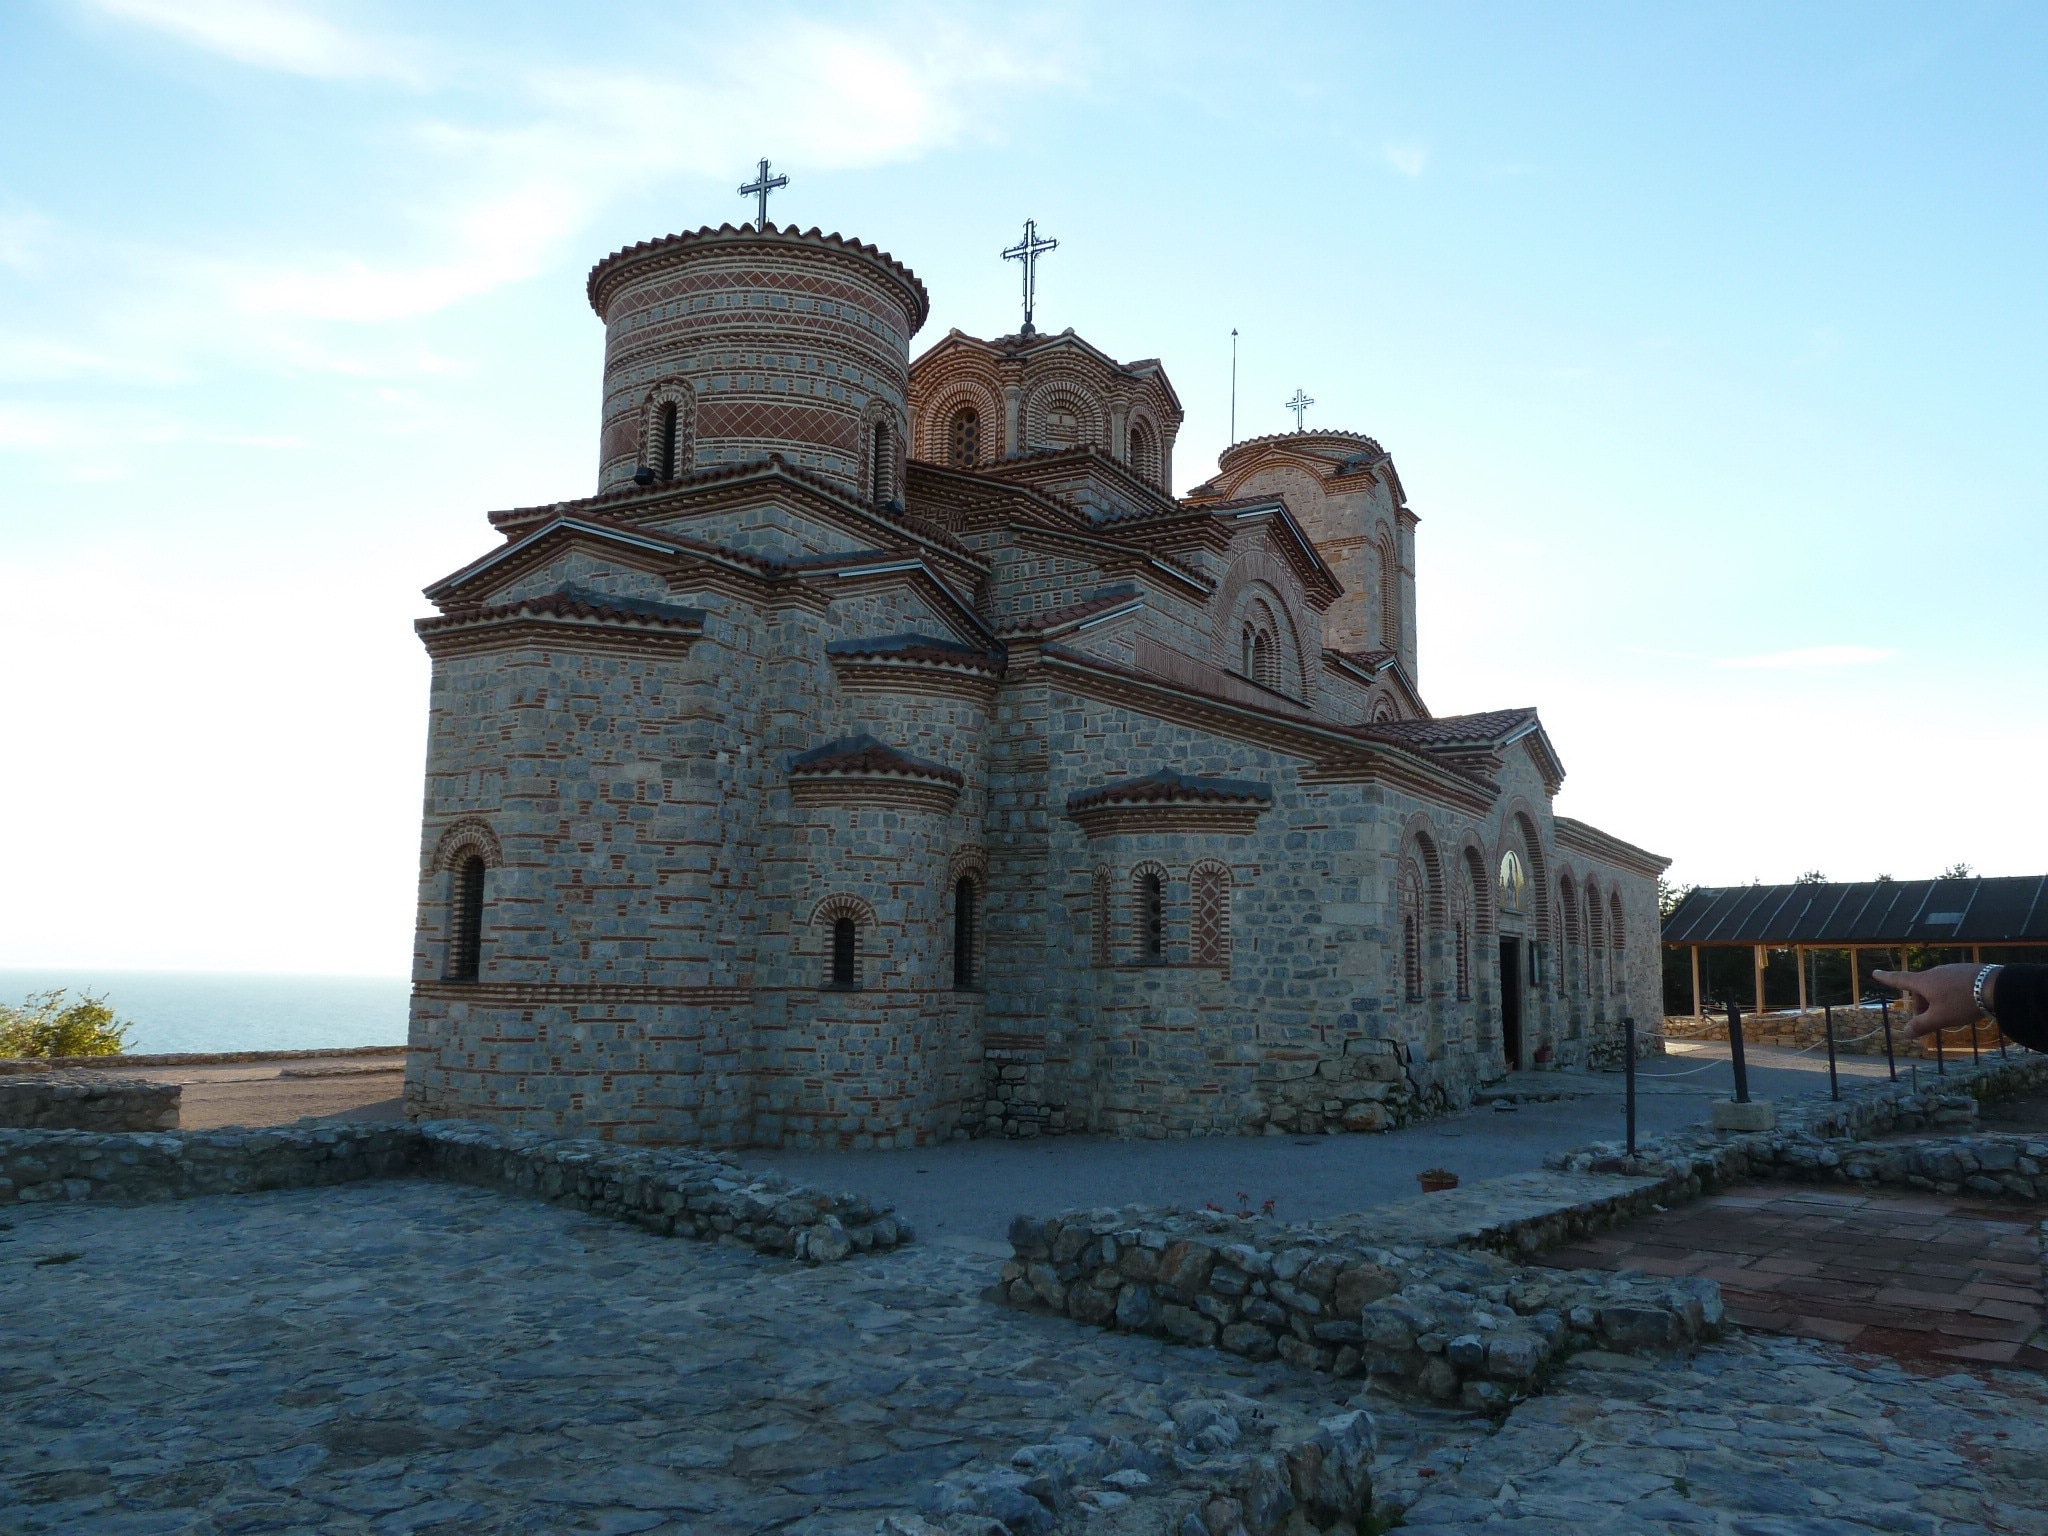 One of the beautiful churches on Lake Ohrid in Macedonia
Ohrid is notable for once having had 365 churches, one for each day of the year, and has been referred to as a "Jerusalem (of the Balkans)"